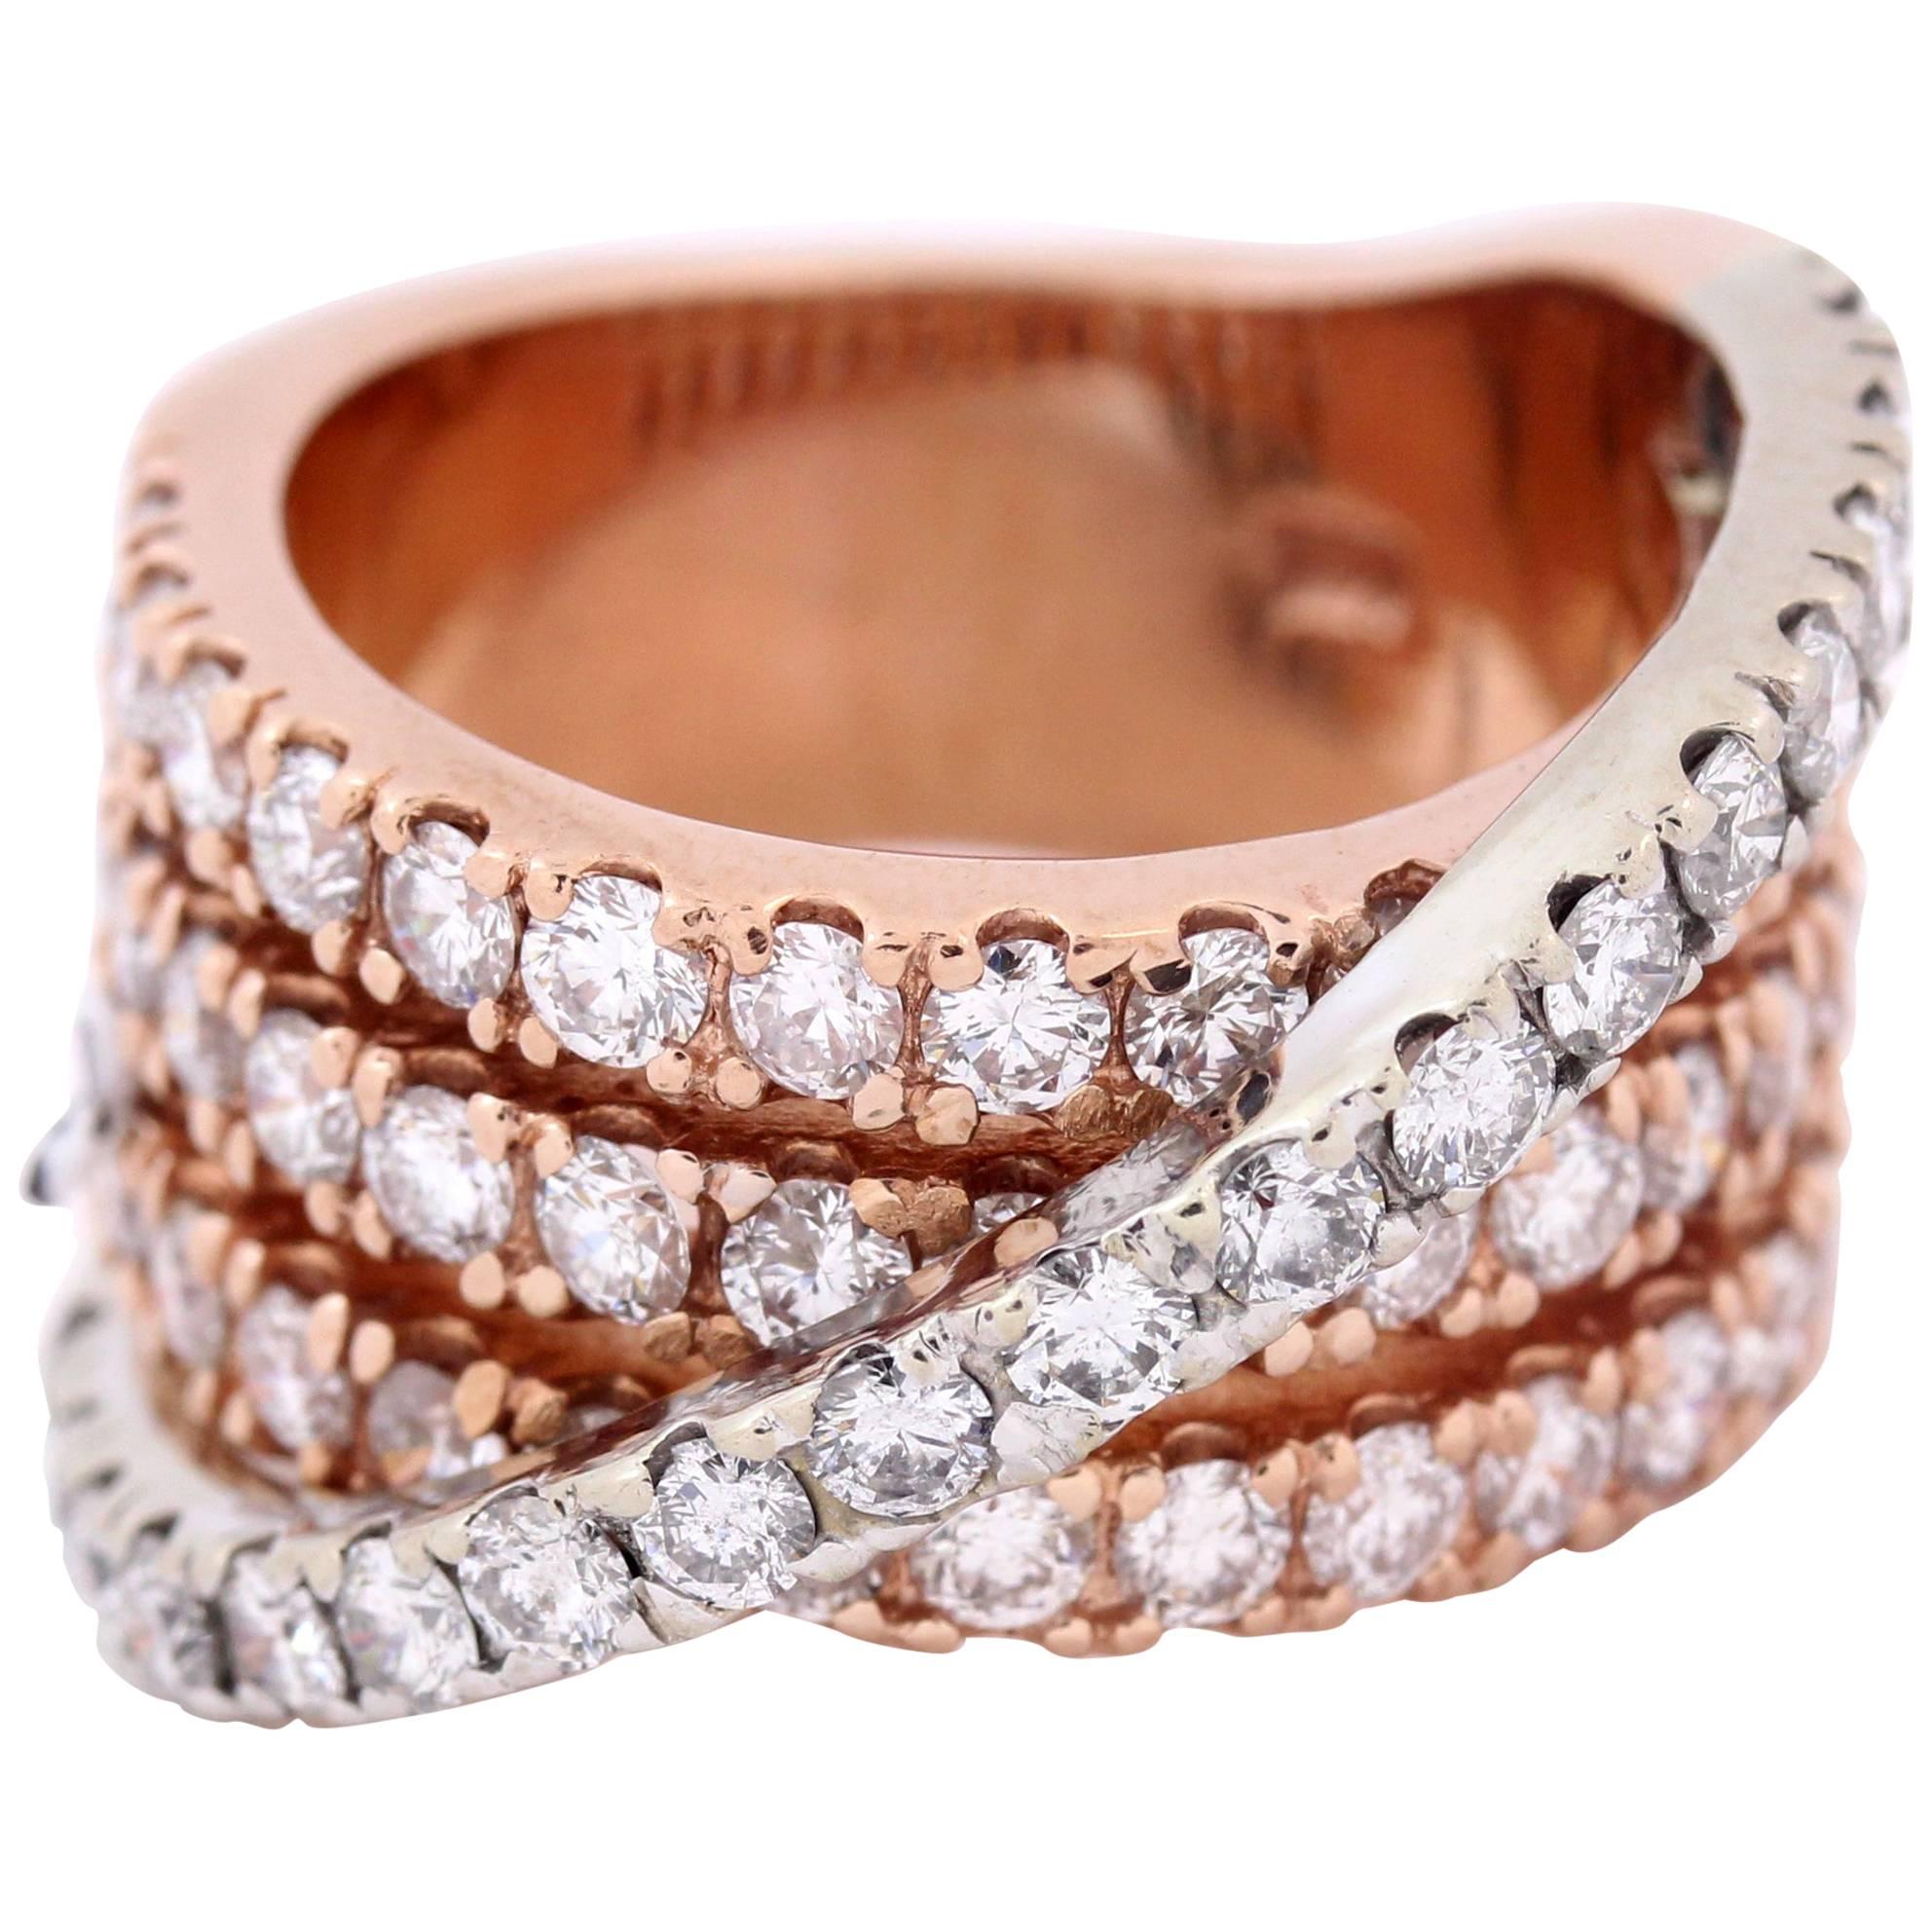 18K Rose and White Gold Band Ring with Diamonds

Diamonds are set half way on band with one layer of white gold crossing over ring. 3.20ct. apprx H Color, SI Clarity DIamonds total weight

Width is 0.5 inch.

Size 6.5. Sizable
